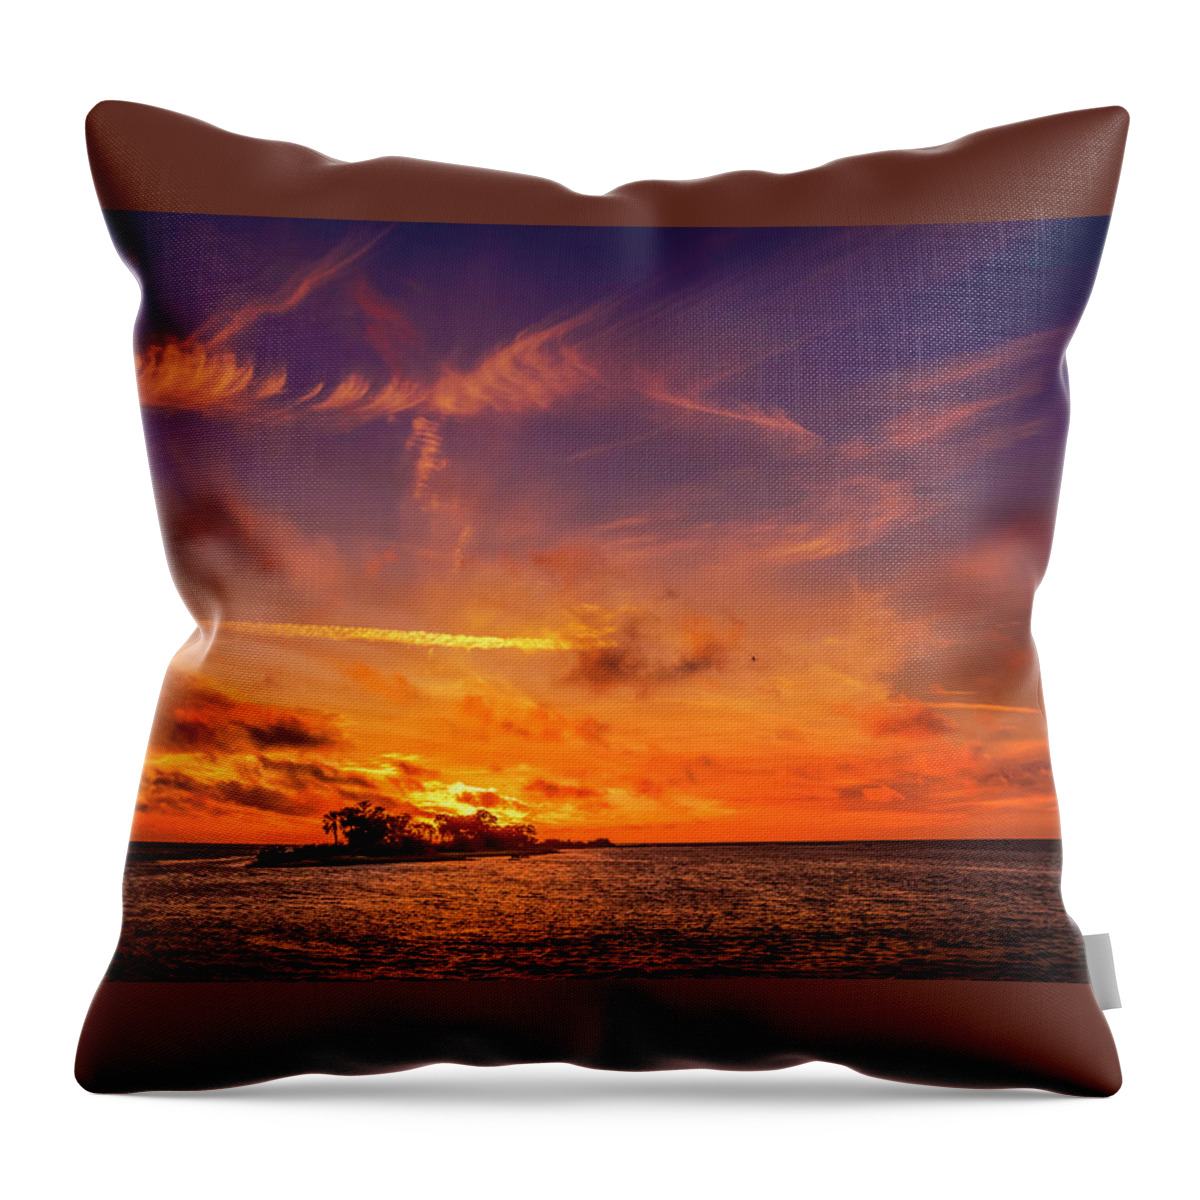 Clouds Throw Pillow featuring the photograph The Three Hour Tour by Marvin Spates